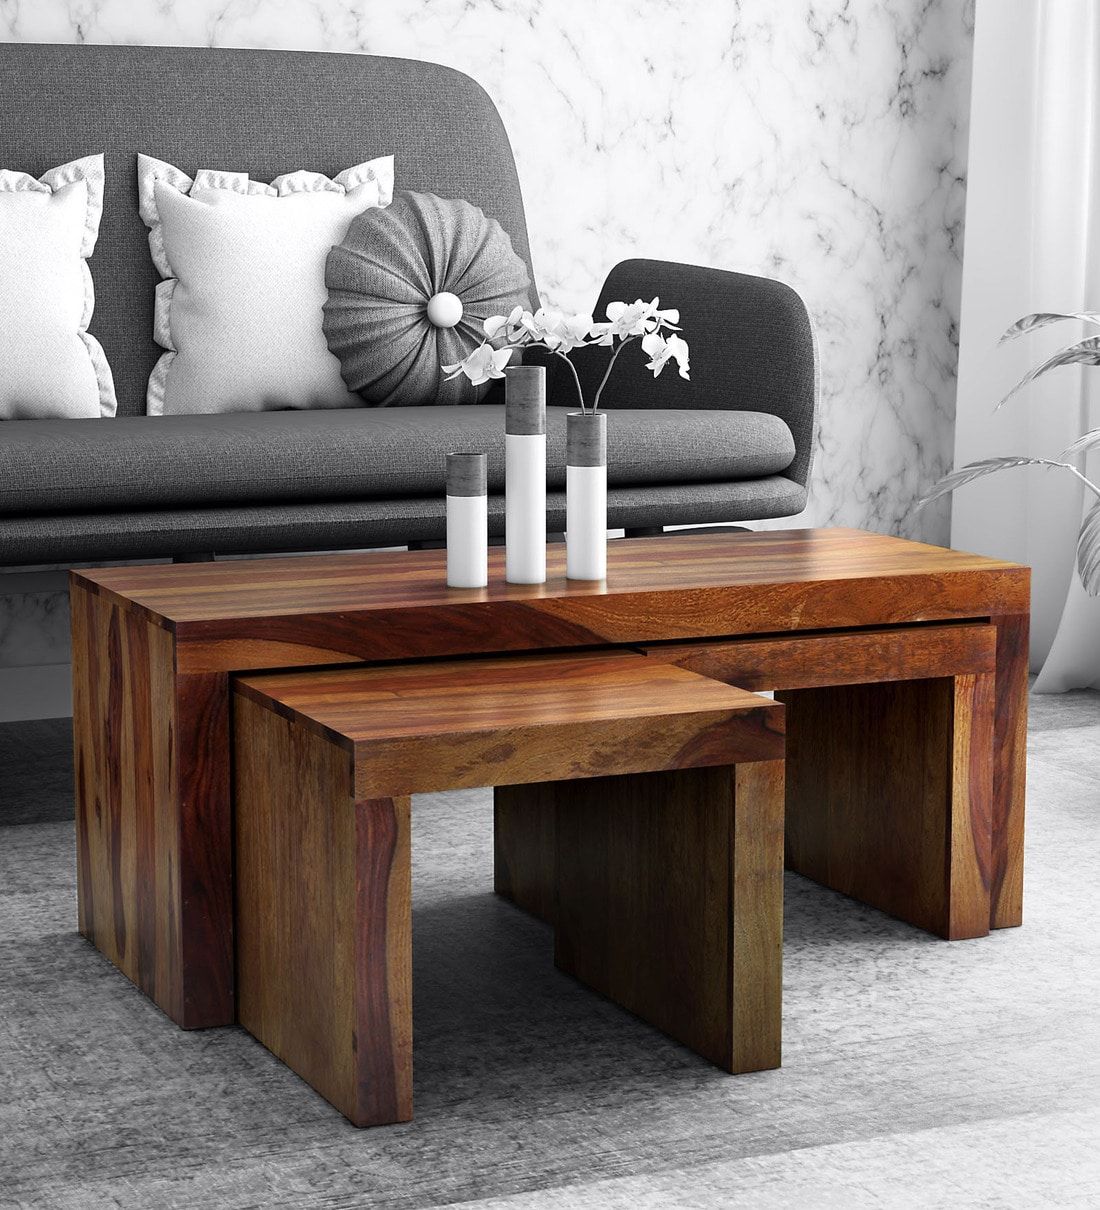 Buy Acropolis Solid Wood Nesting Coffee Table Set In Provincial Teak Inside Nesting Coffee Tables (View 8 of 20)